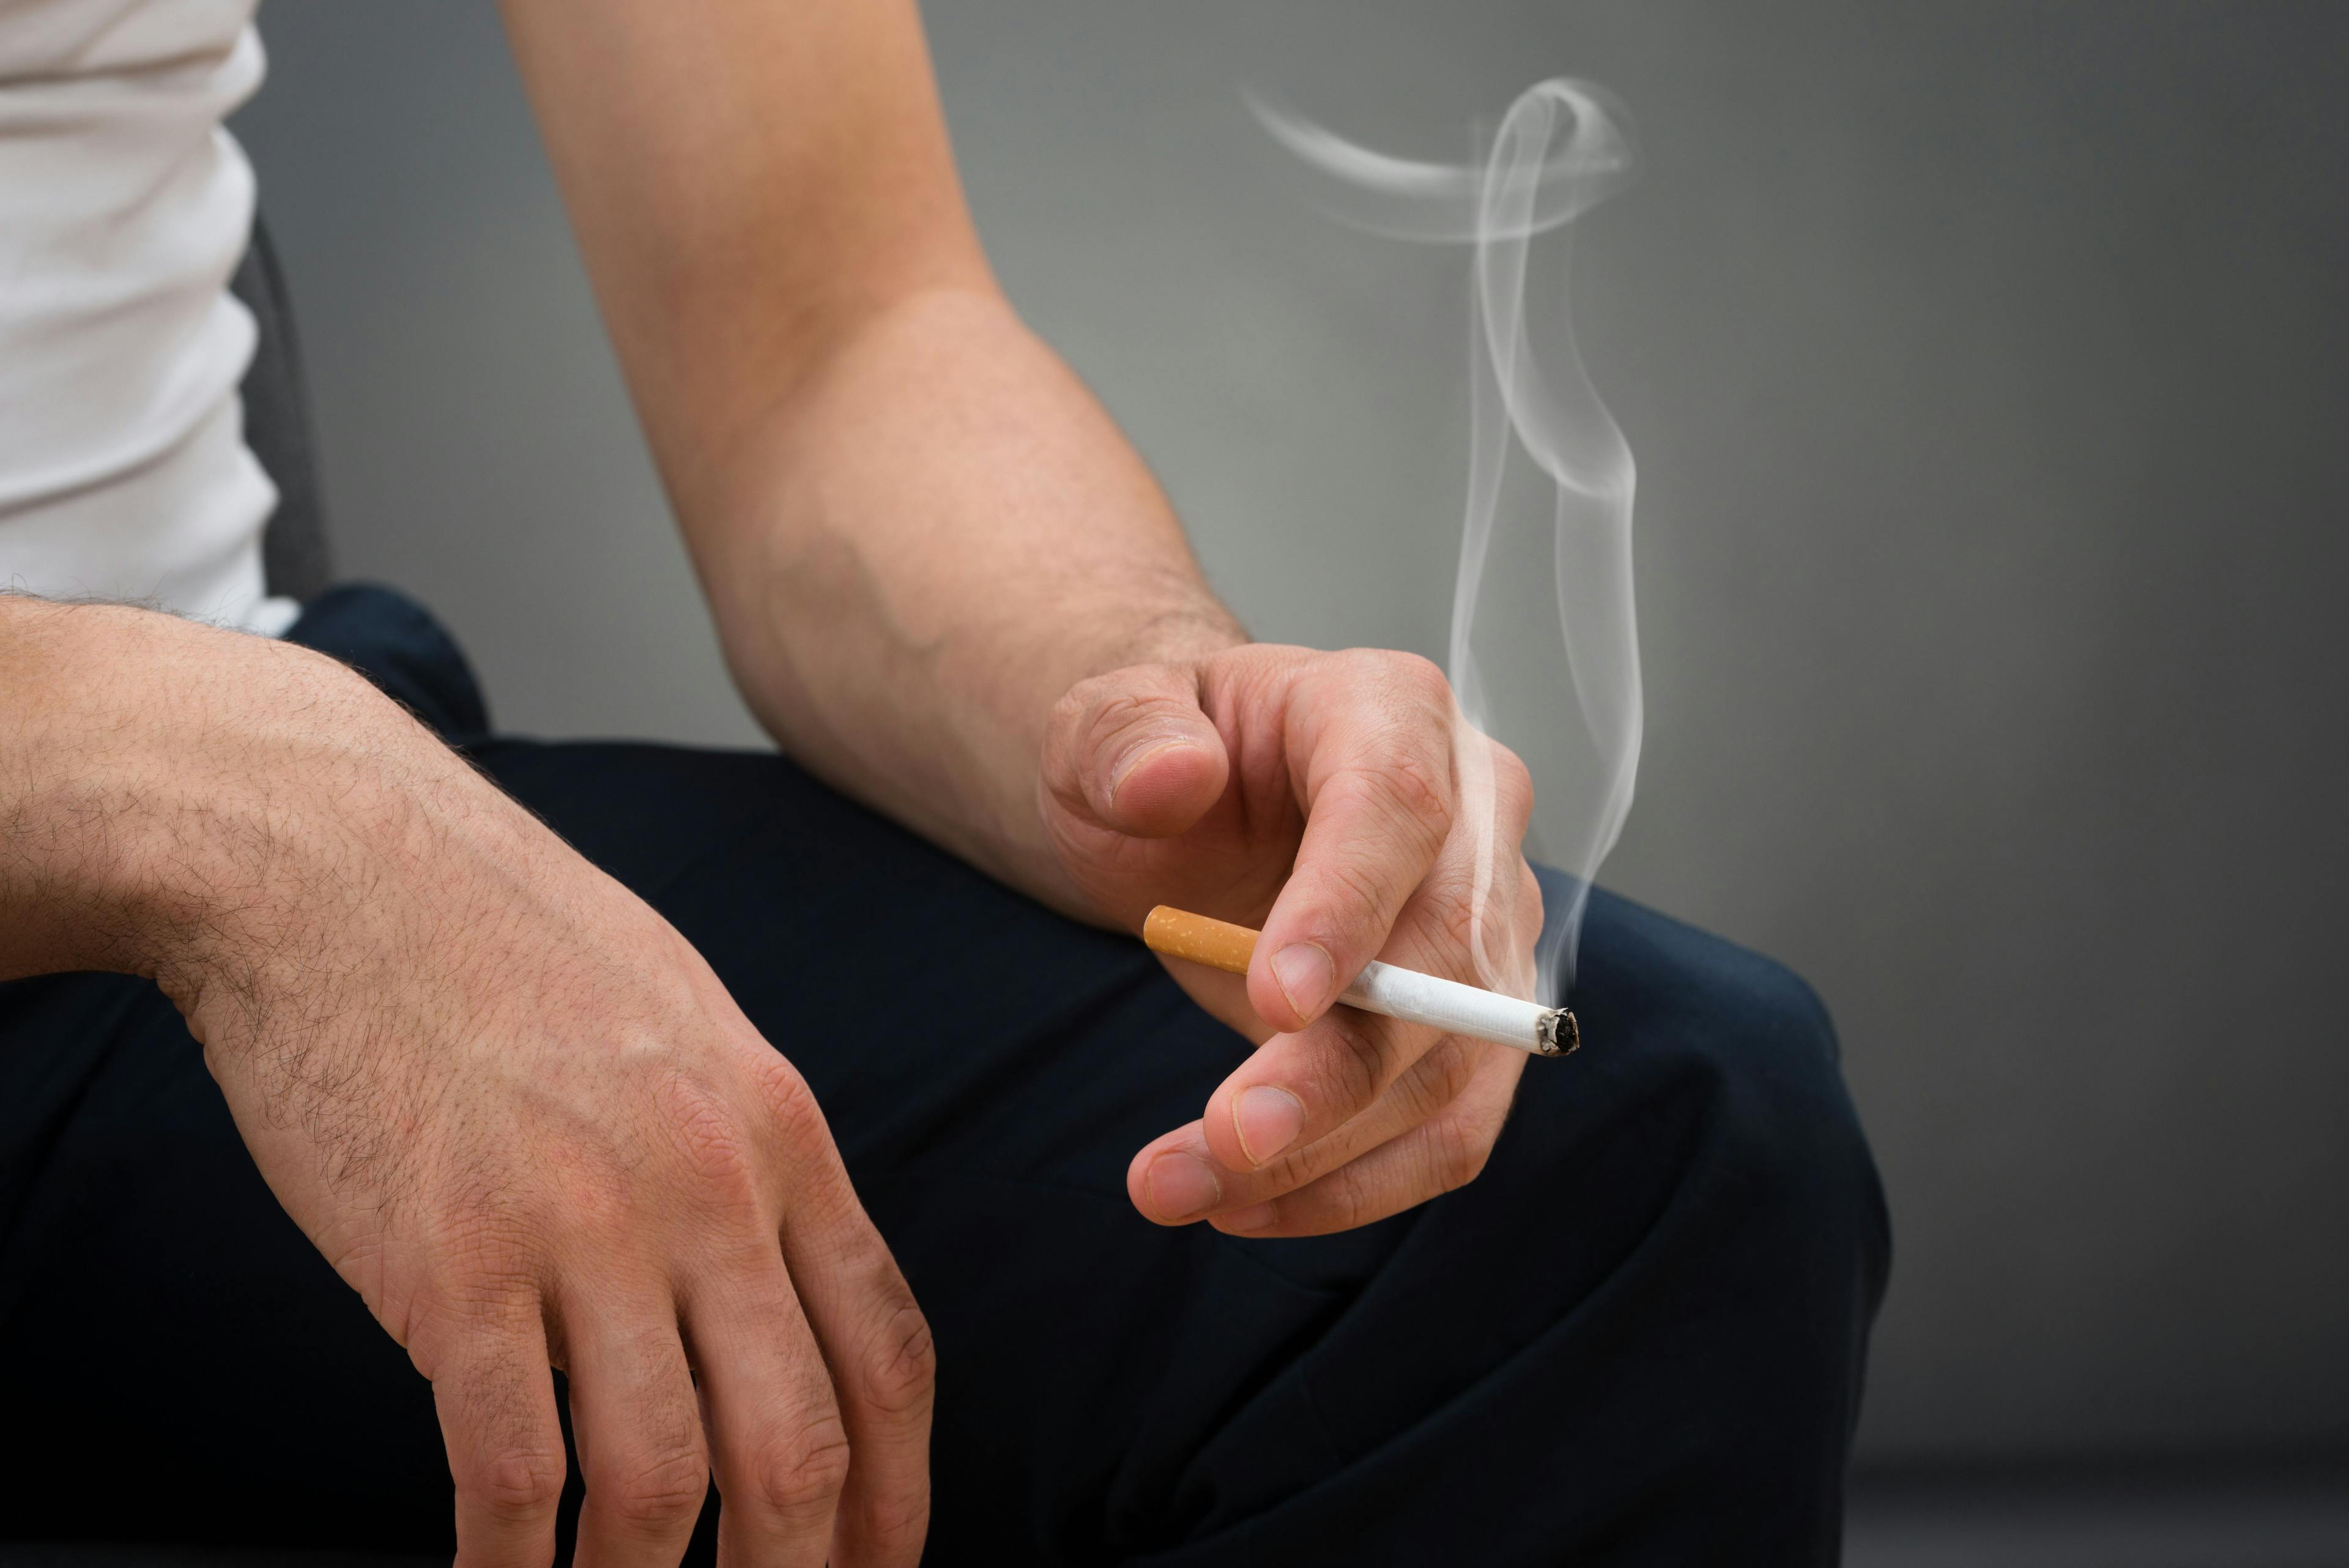 Nicotine Use May Heighten Risk of Substance Use and Anxiety-Like Behaviors in Offspring